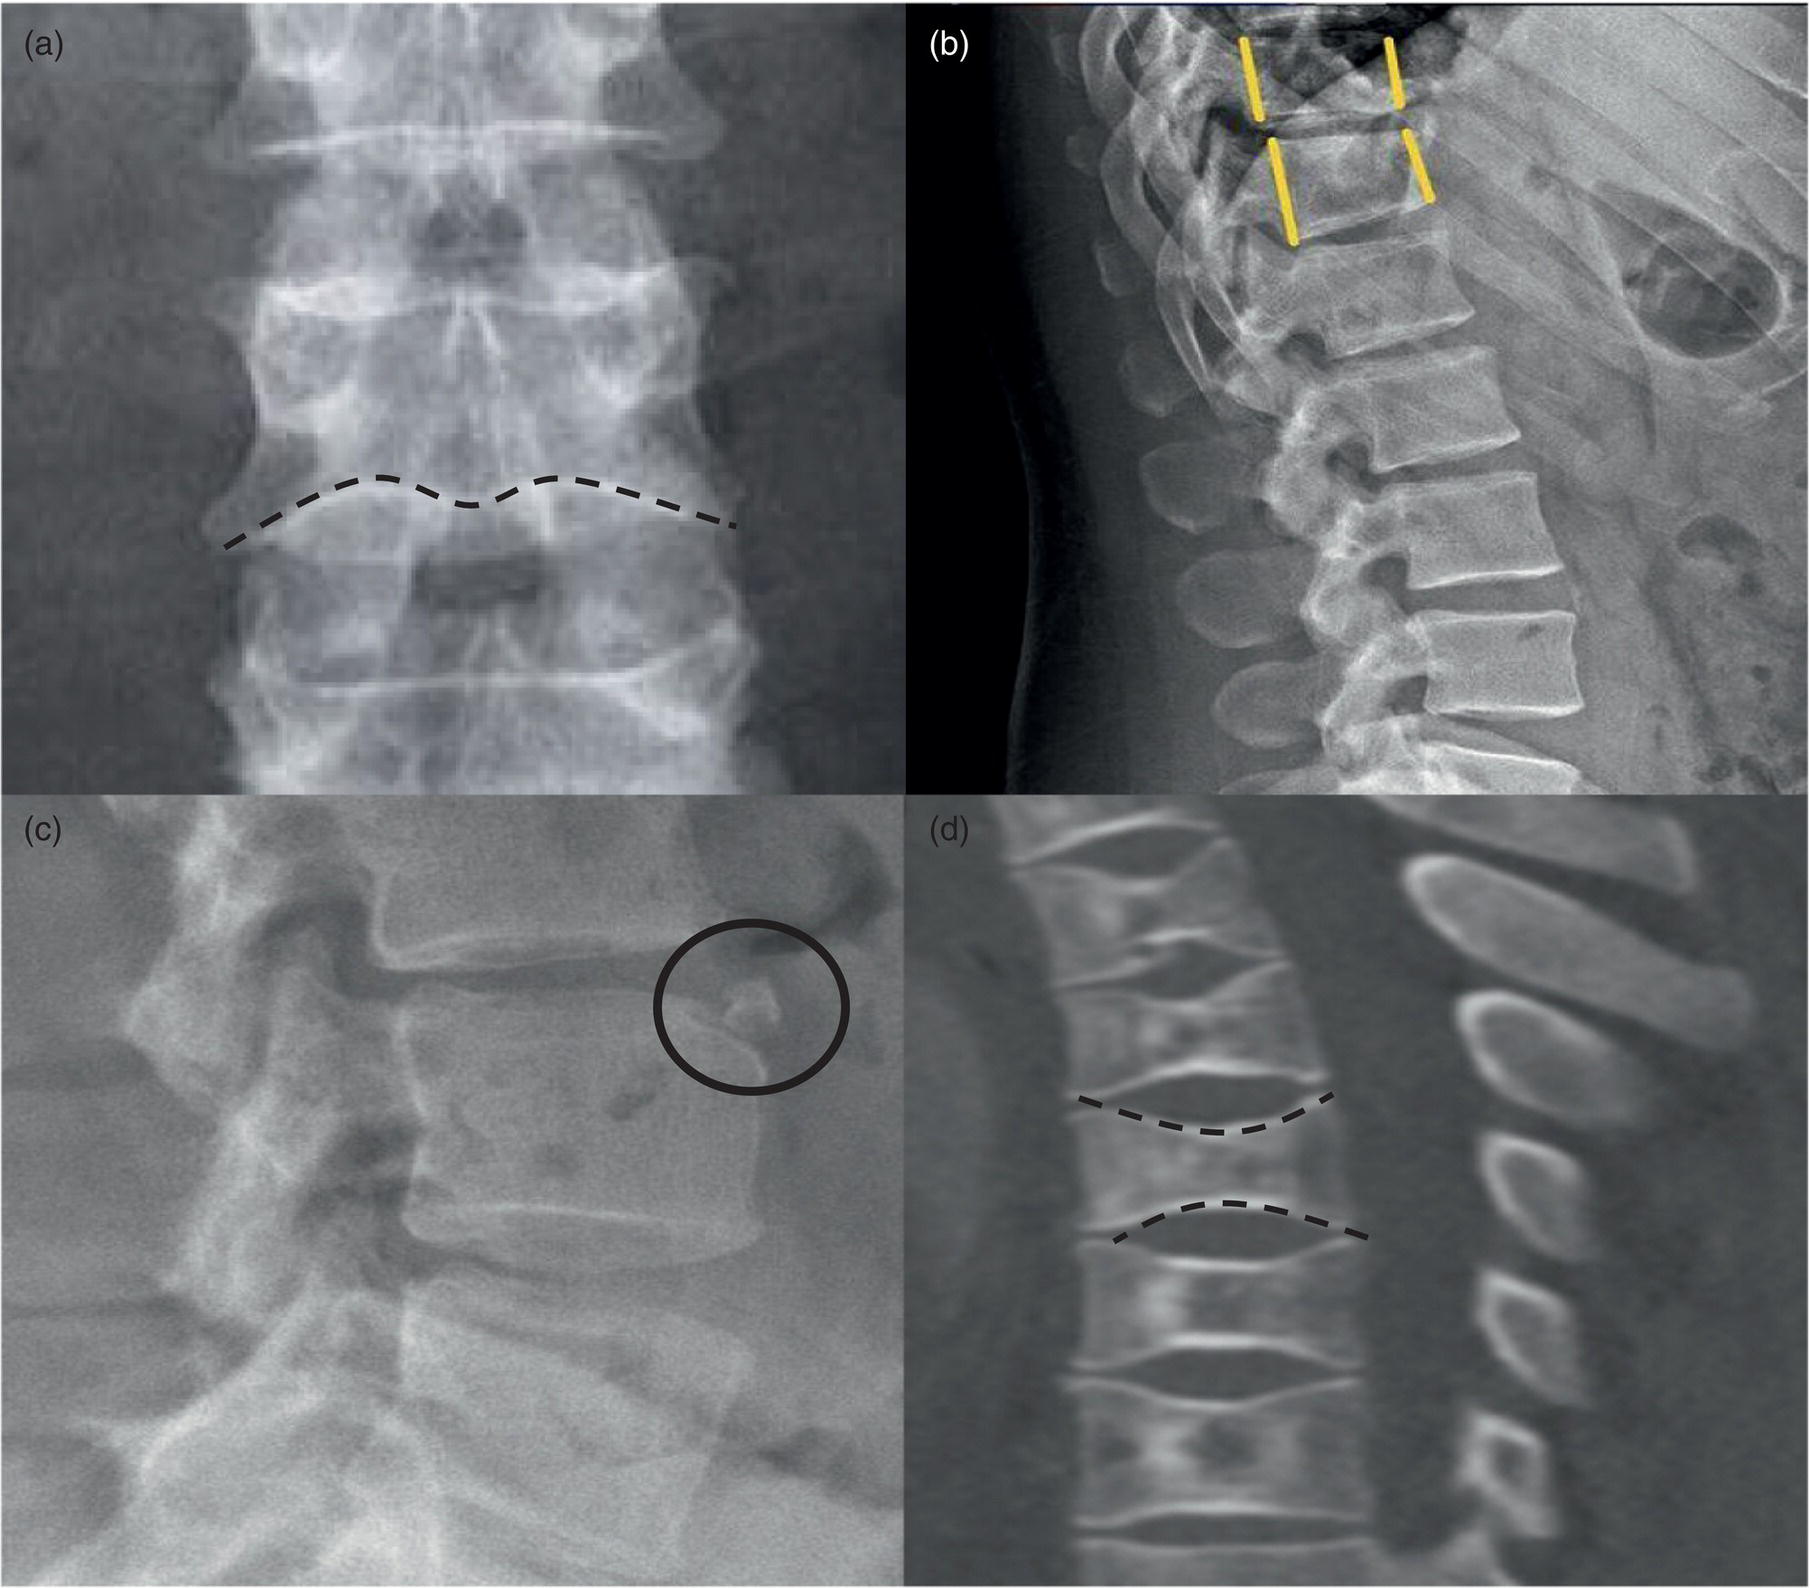 Schematic illustration of examples of normal variants and mimickers of vertebral fractures on radiographs.